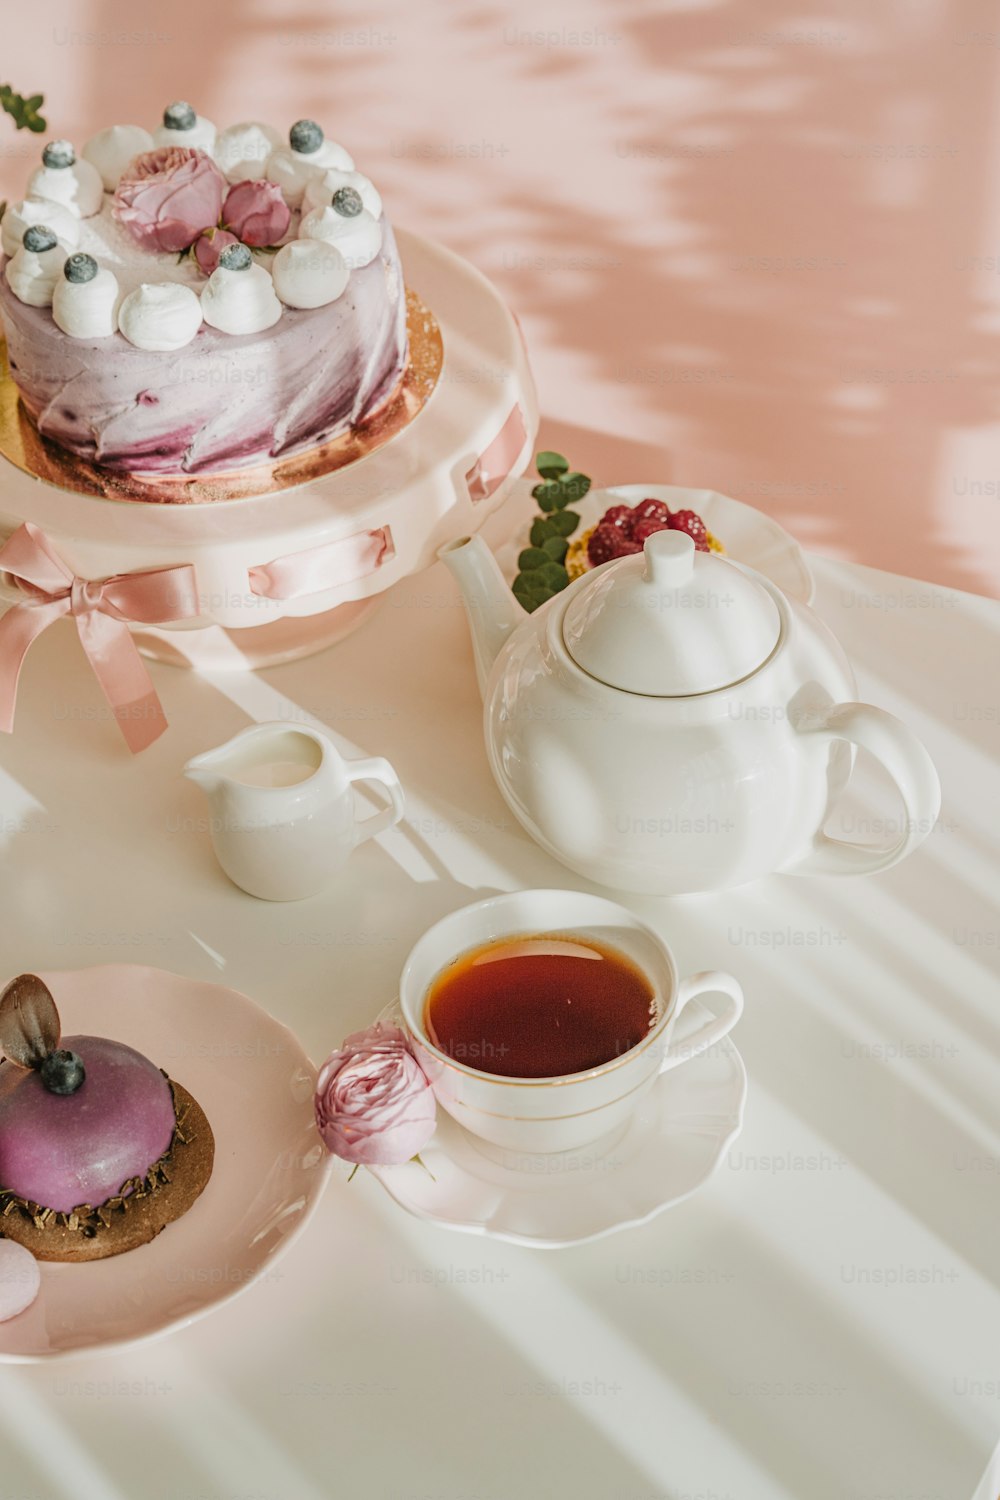 a table topped with a cake next to a cup of tea